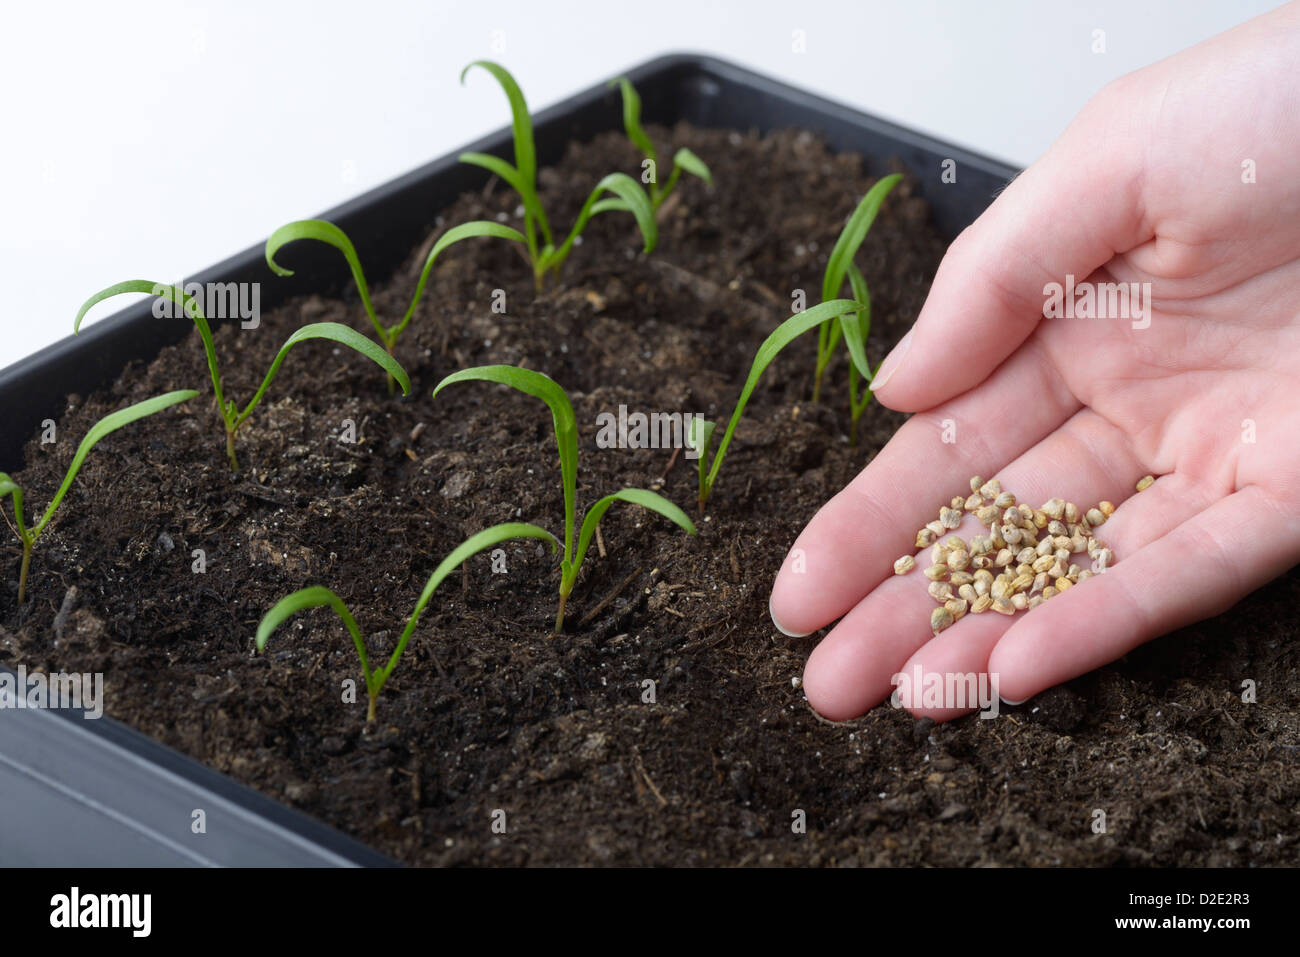 Spinach, Spinacia oleracea, seedlings and person showing spinach seeds Stock Photo